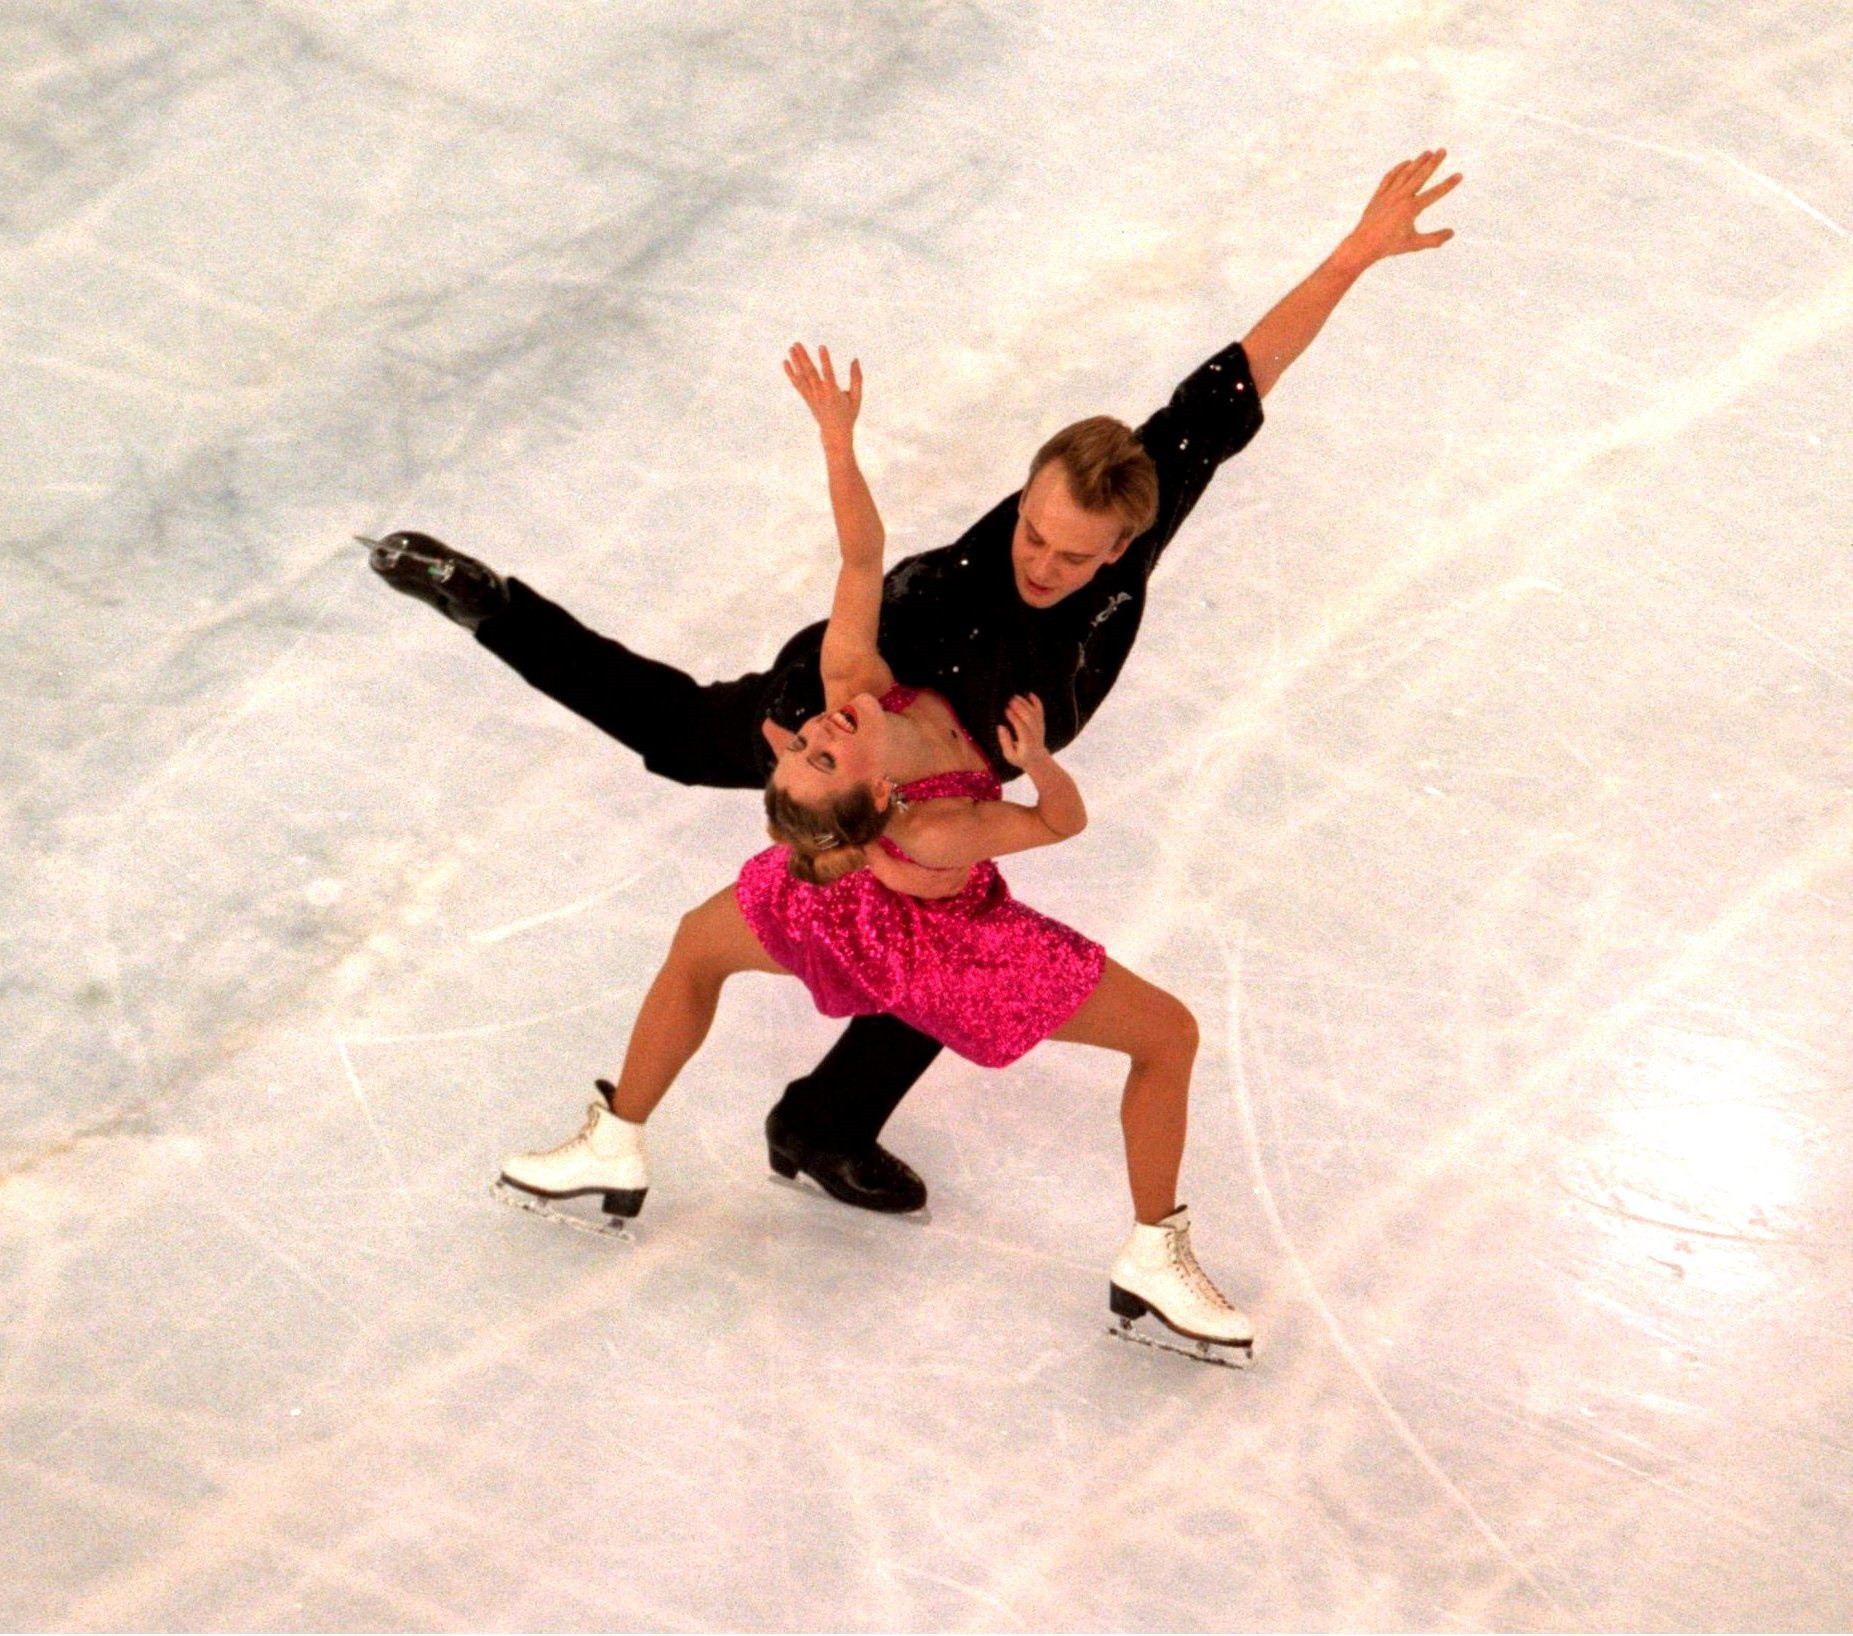 Former Finnish Figure Skating Association President Susanna Rahkamo starred in ice dancing competitions with Petri Kokko in the 1990s ©Getty Images
